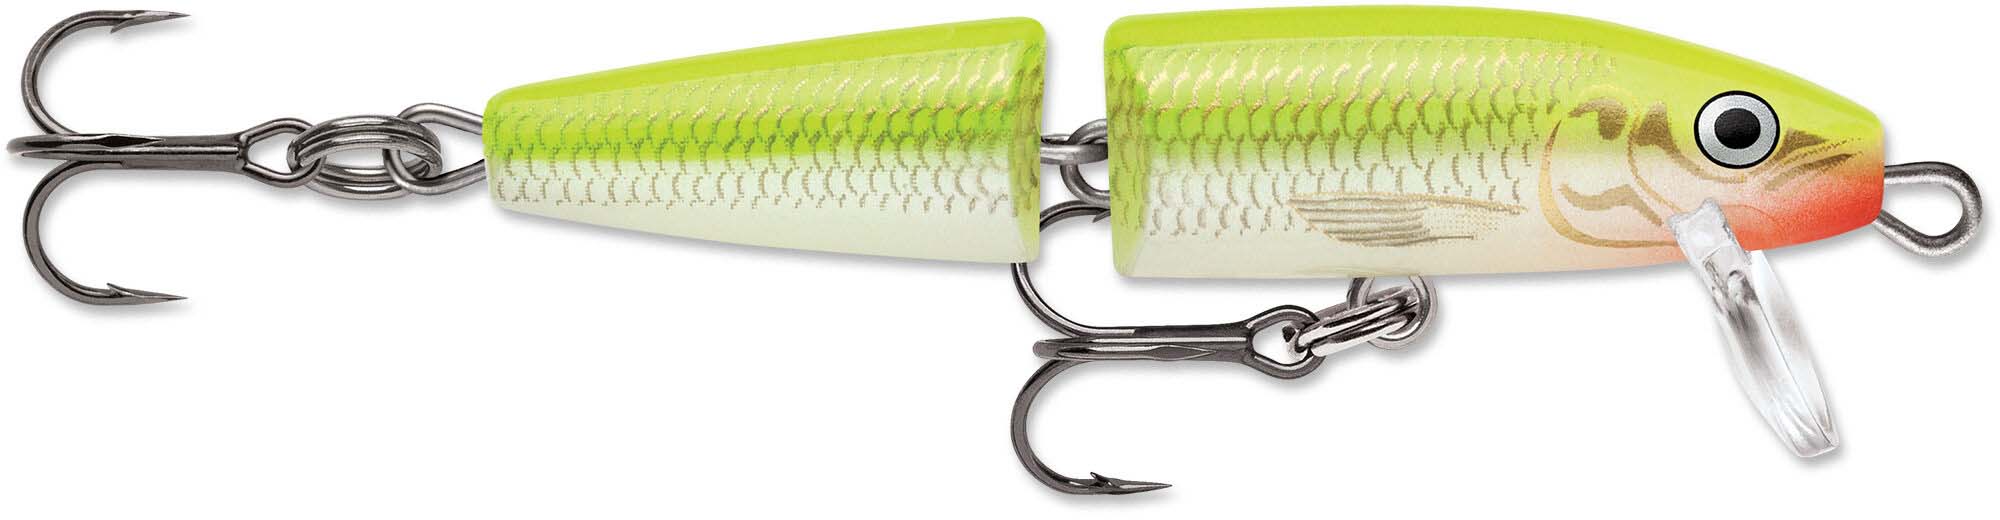 https://op1.0ps.us/original/opplanet-rapala-jointed-05-lure-silver-fluorescent-chartreuse-j05sfc-main